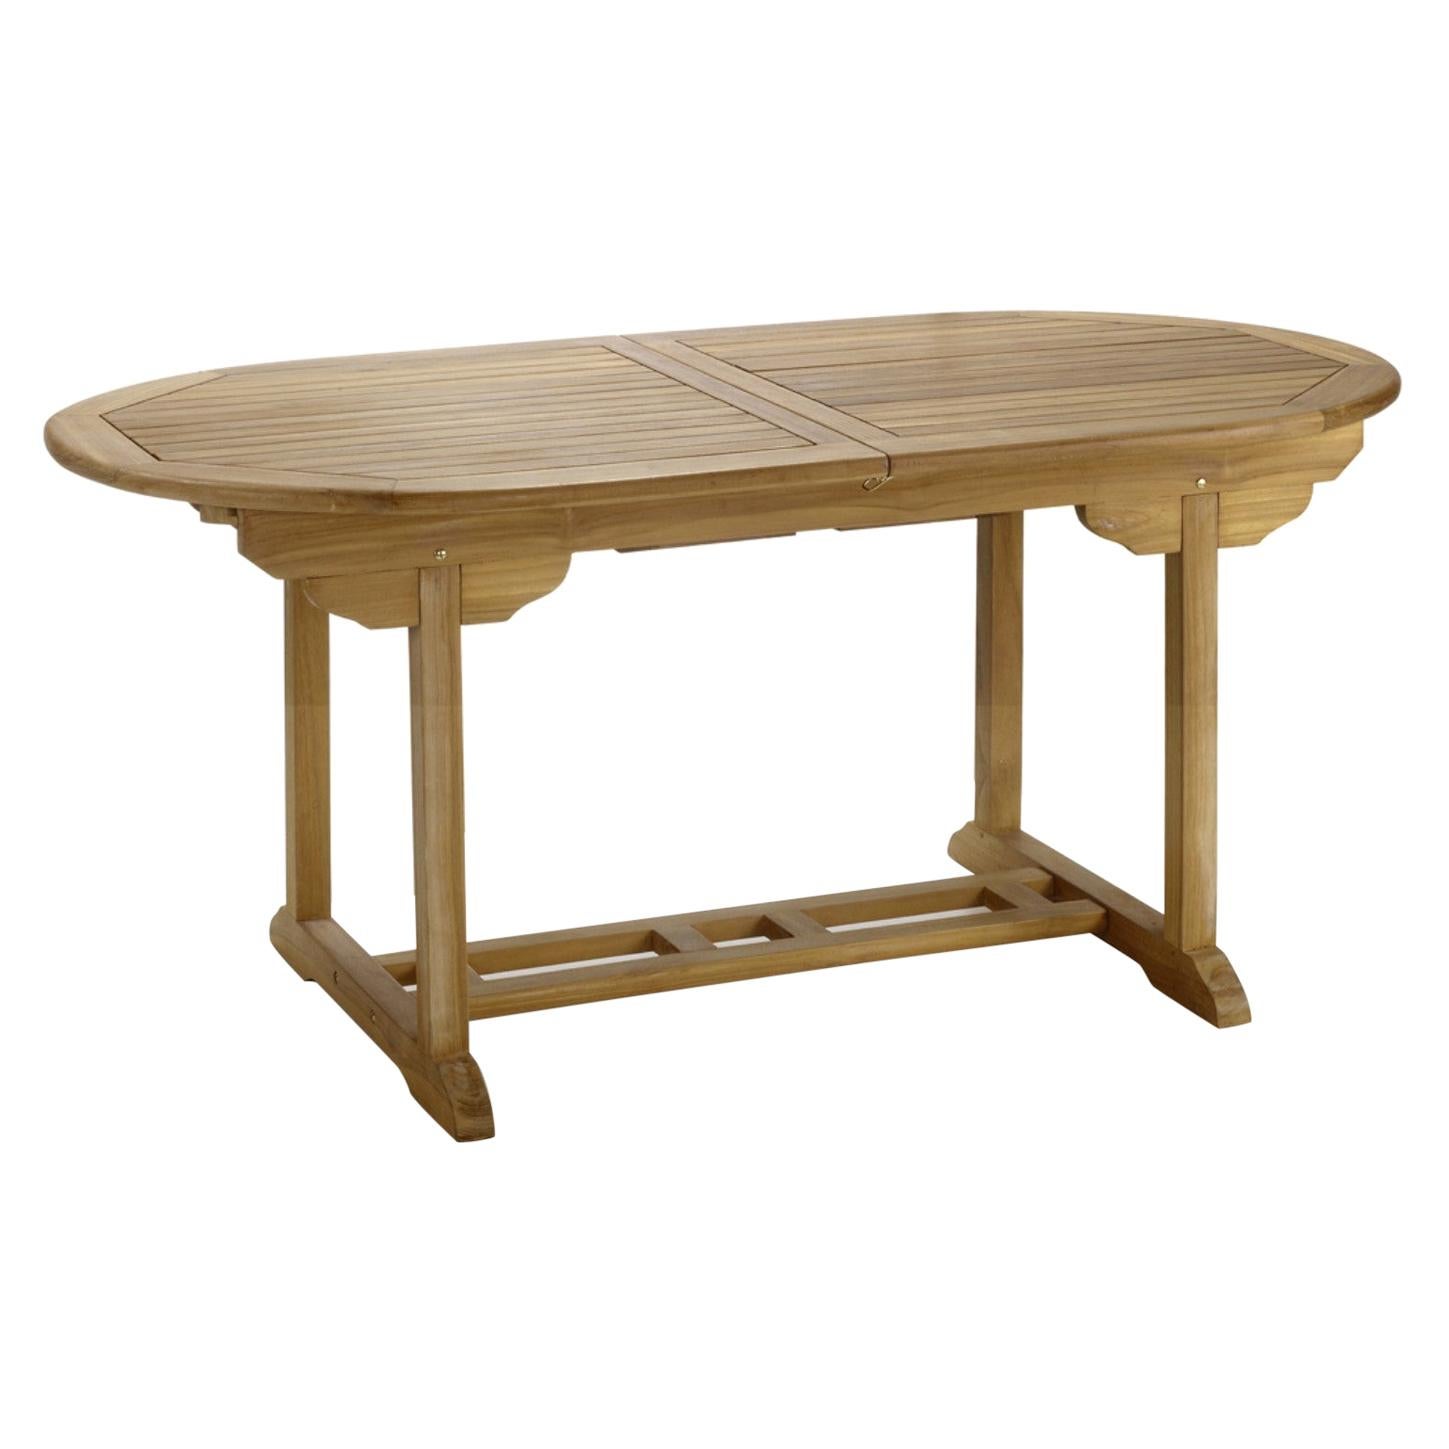 New Teak Oval Foldable Dining Table, Indoor and Outdoor For Sale